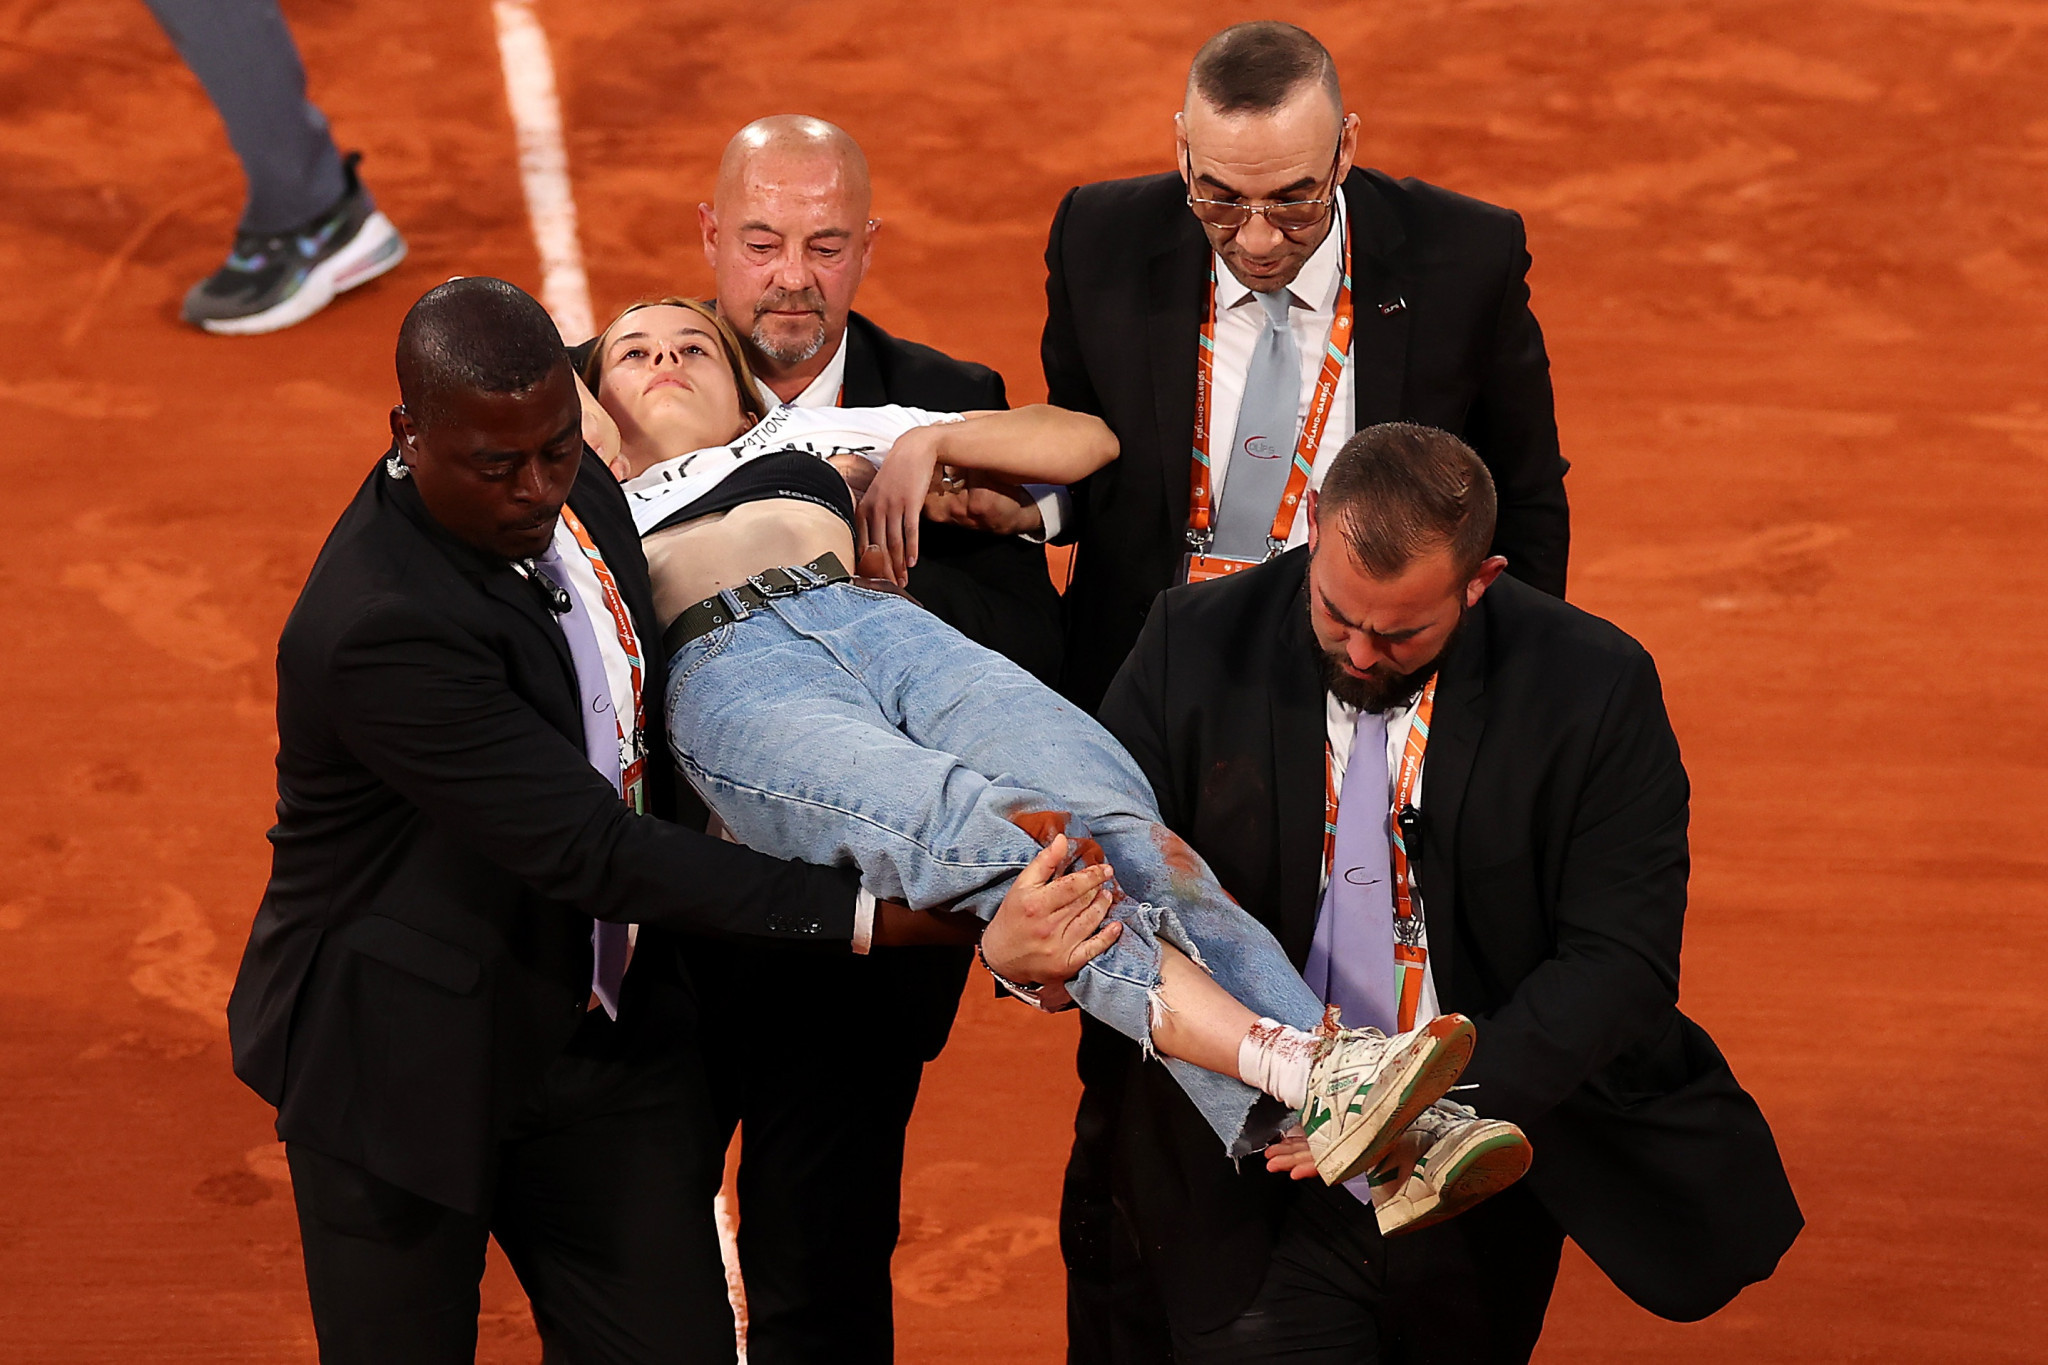 Security guards remove a protestor who tied herself to the net during a men's singles semi-final at the French Open ©Getty Images